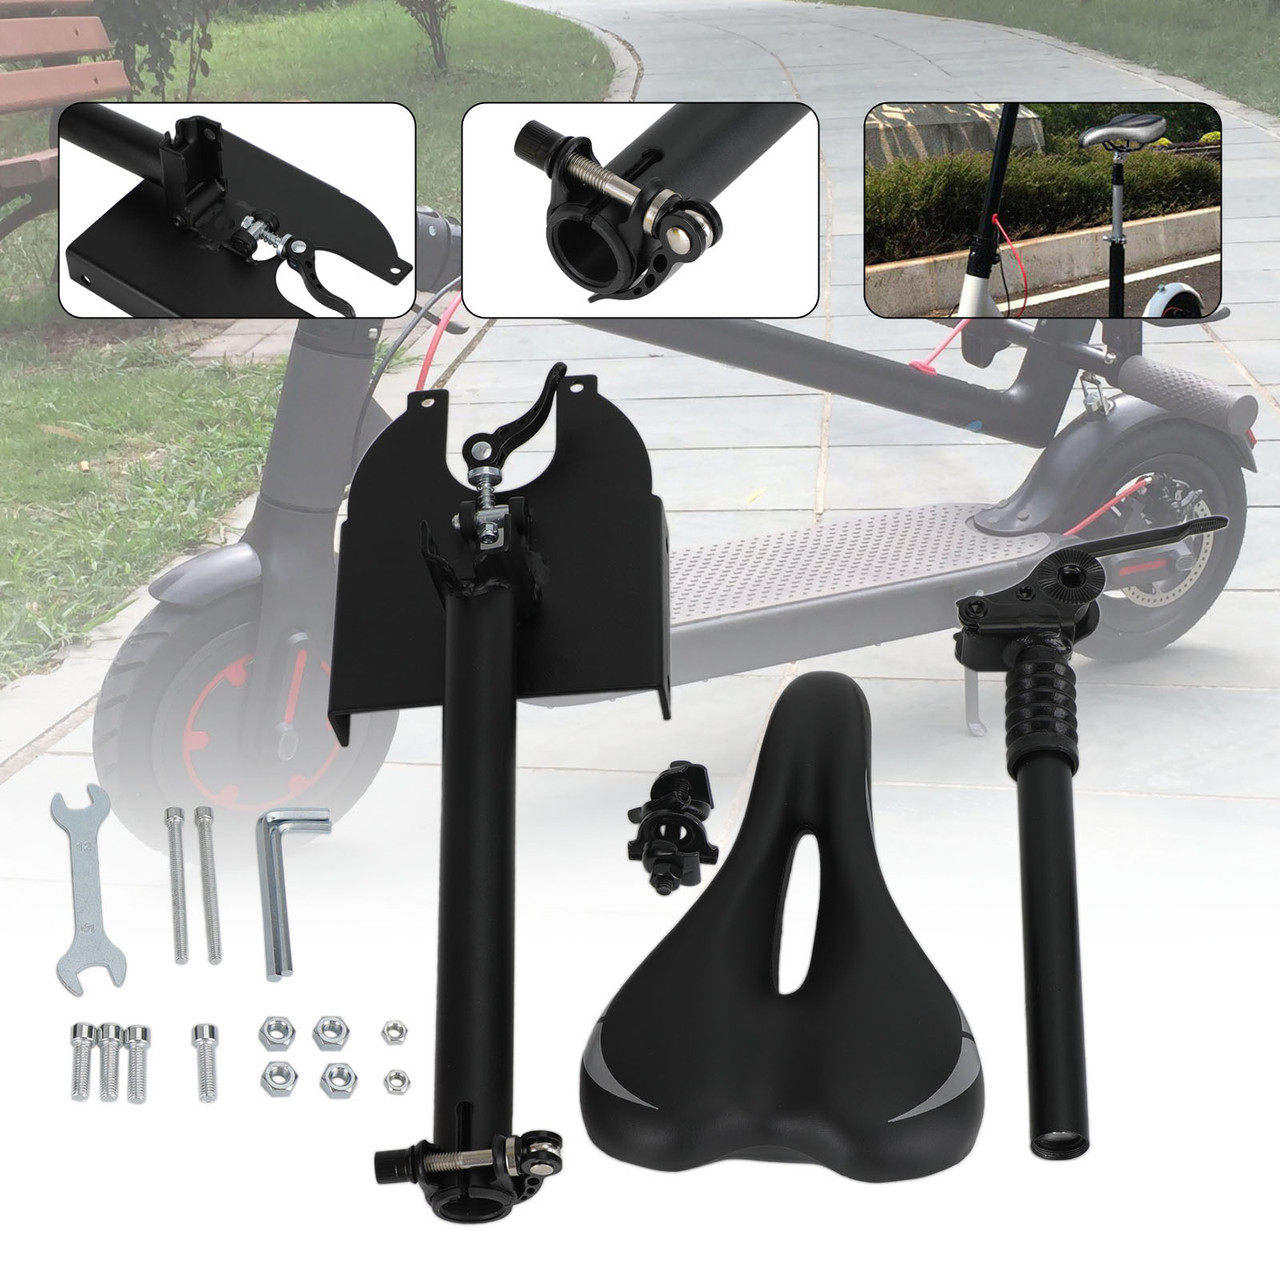 Foldable Electric Scooter Seat Adjustable Skateboard Saddle For Xiaomi M365